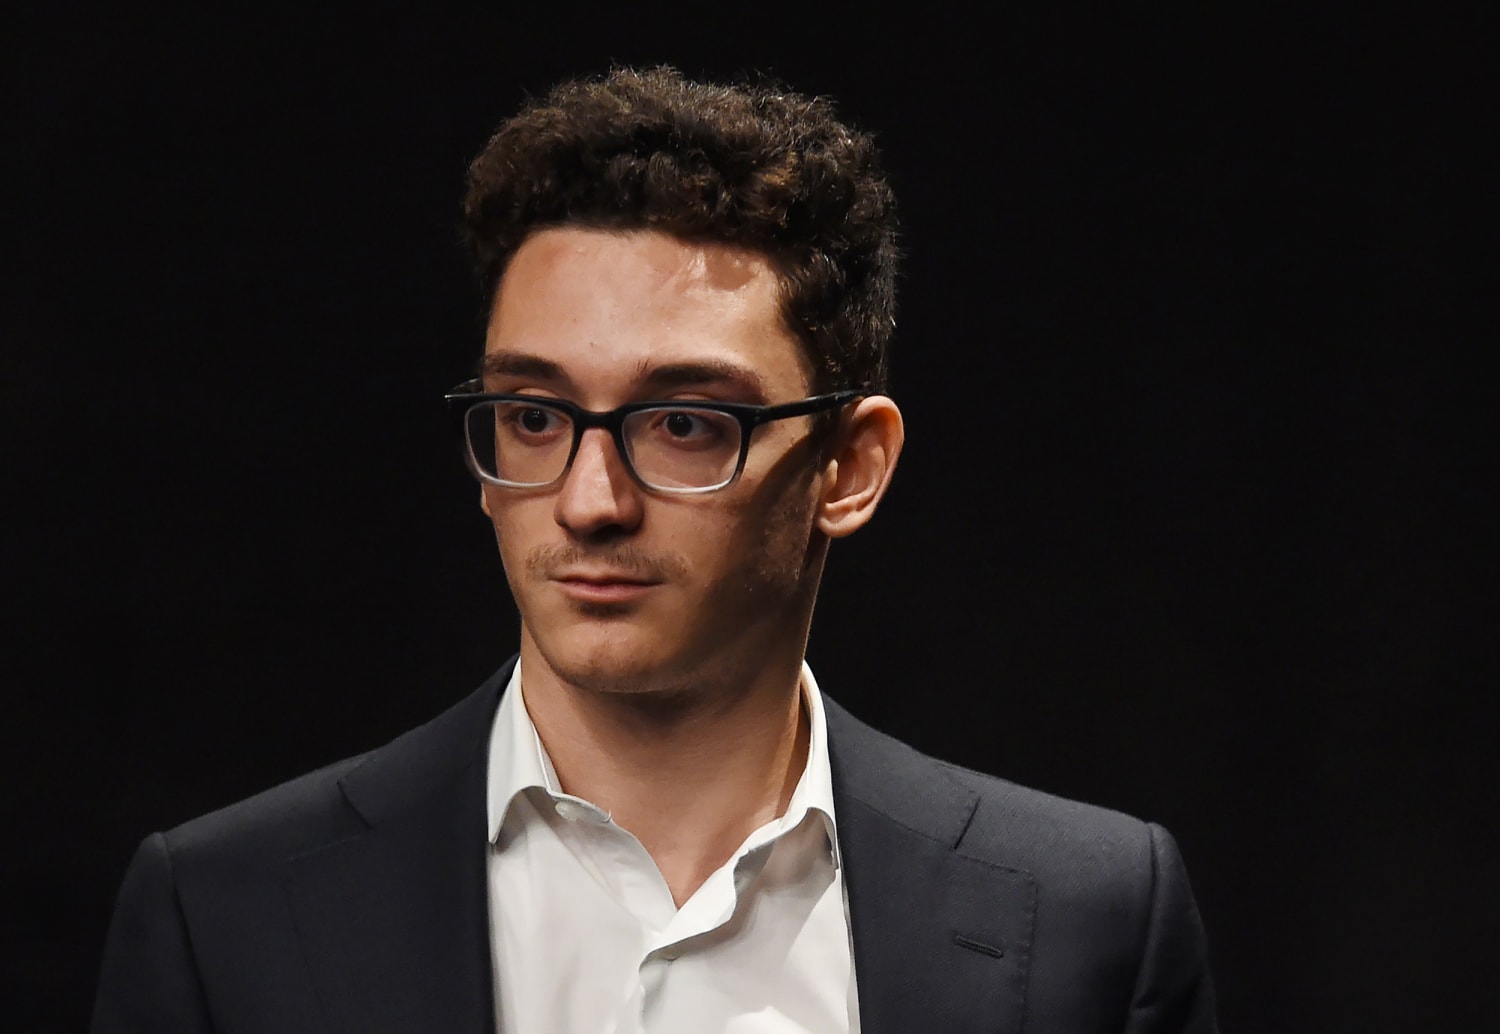 Fabiano Caruana will be the first board in the USA selection